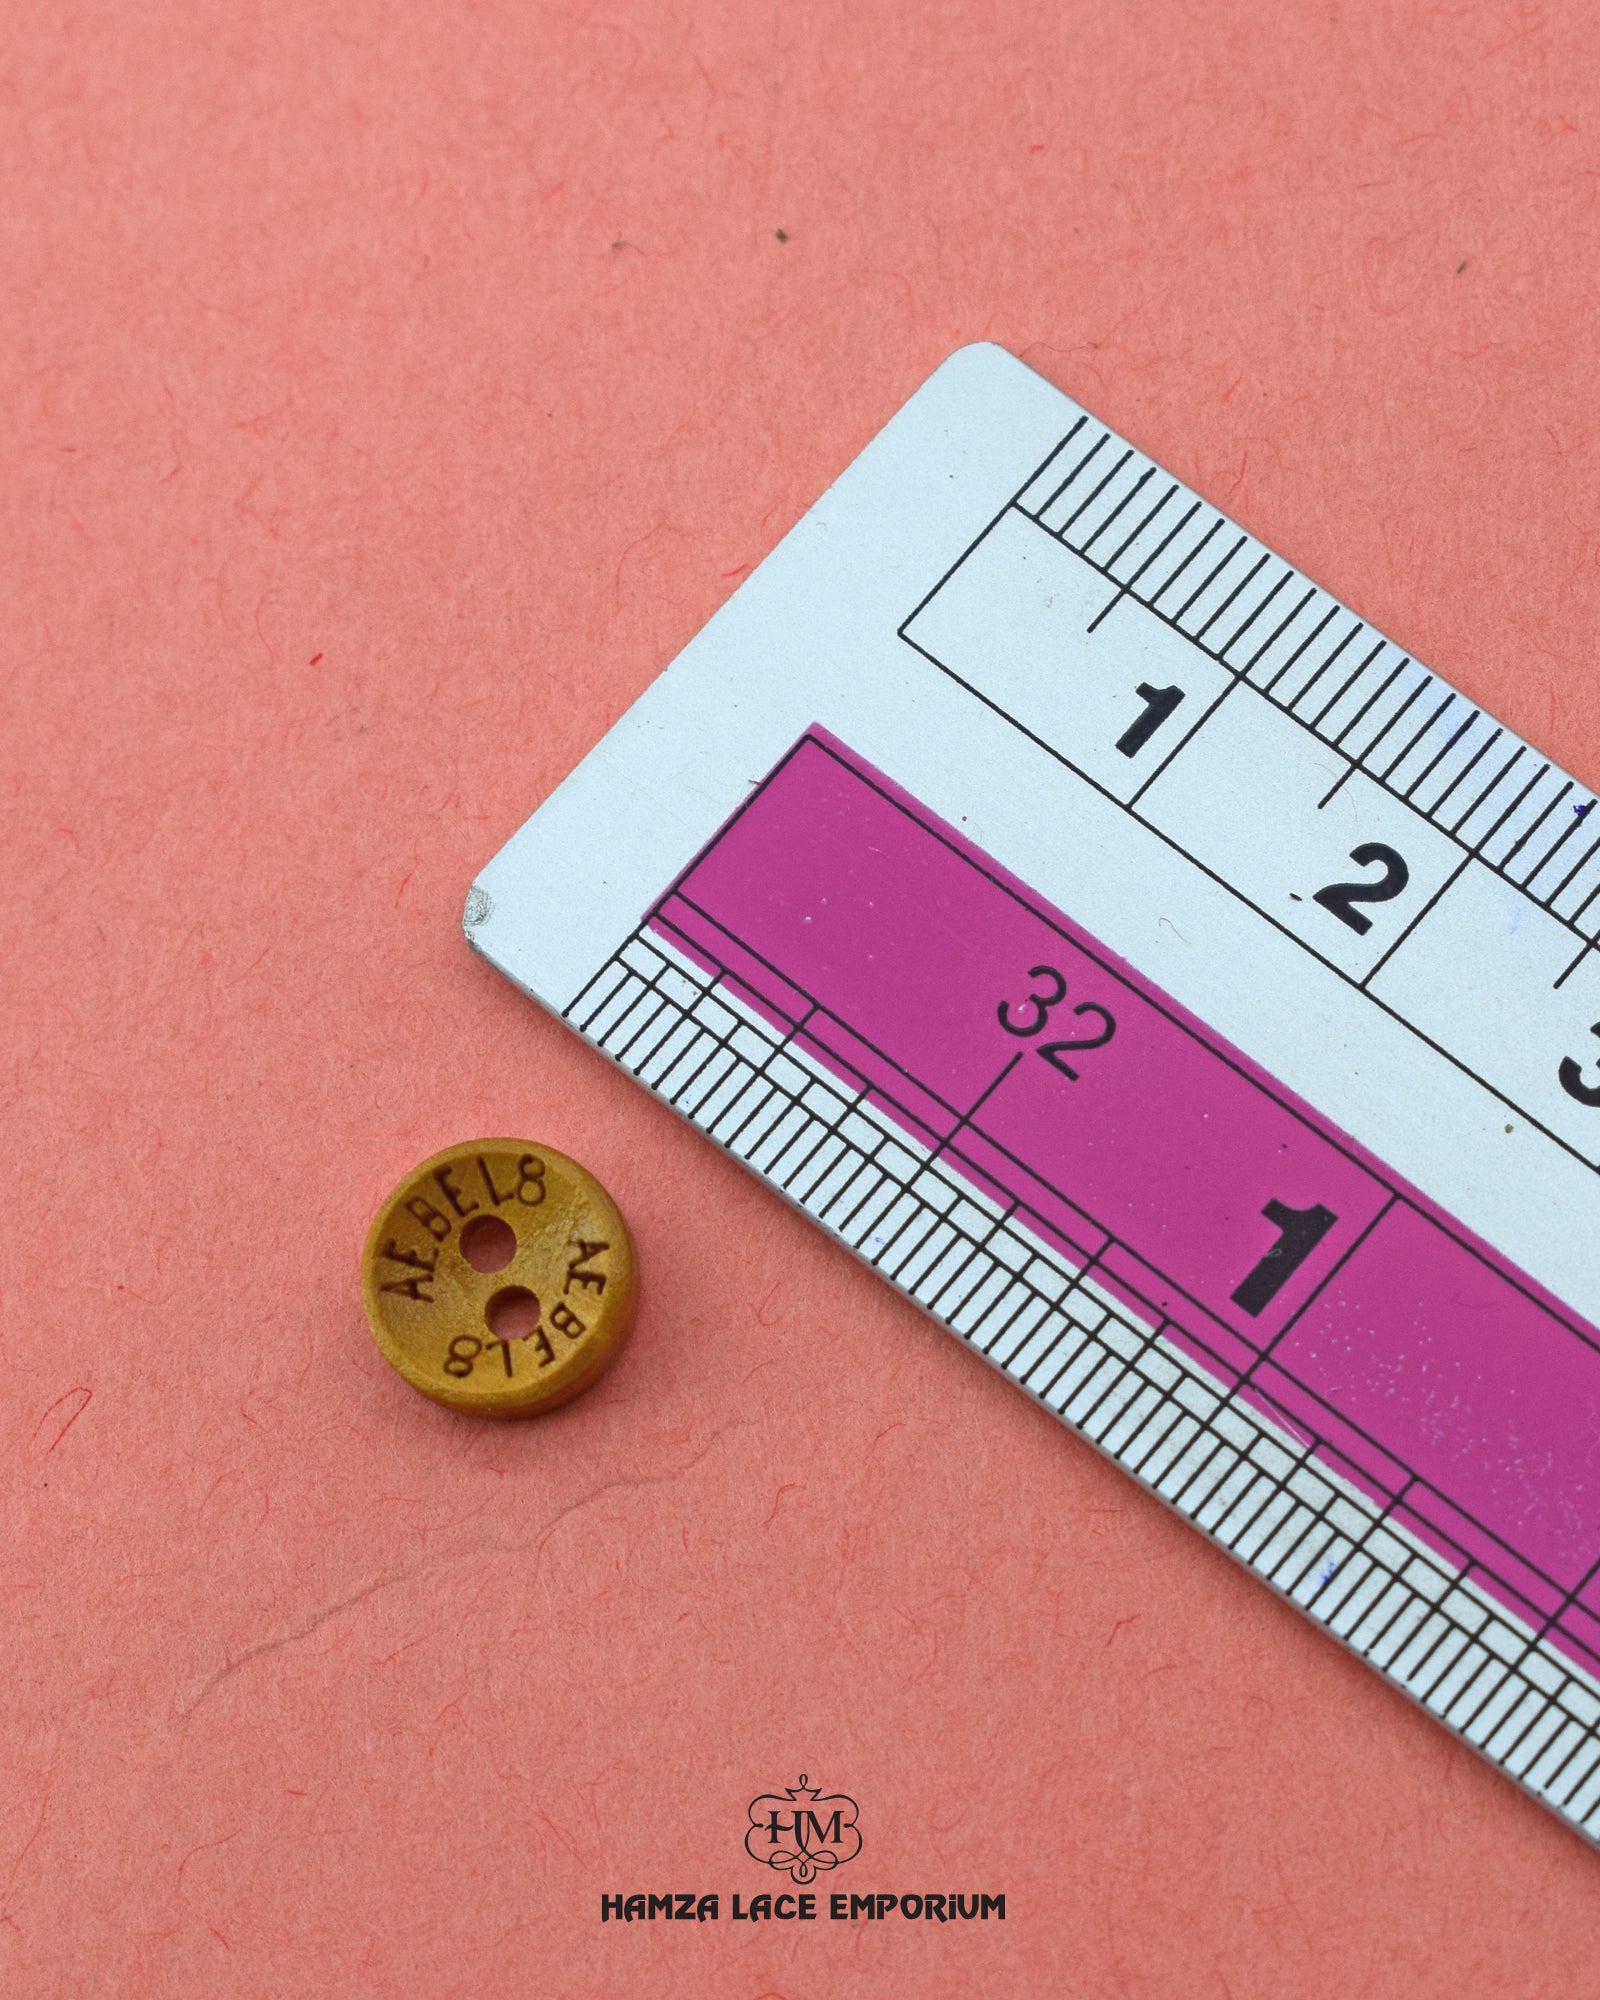 Size of the 'Two Hole Wood Button WB103' is shown with a ruler